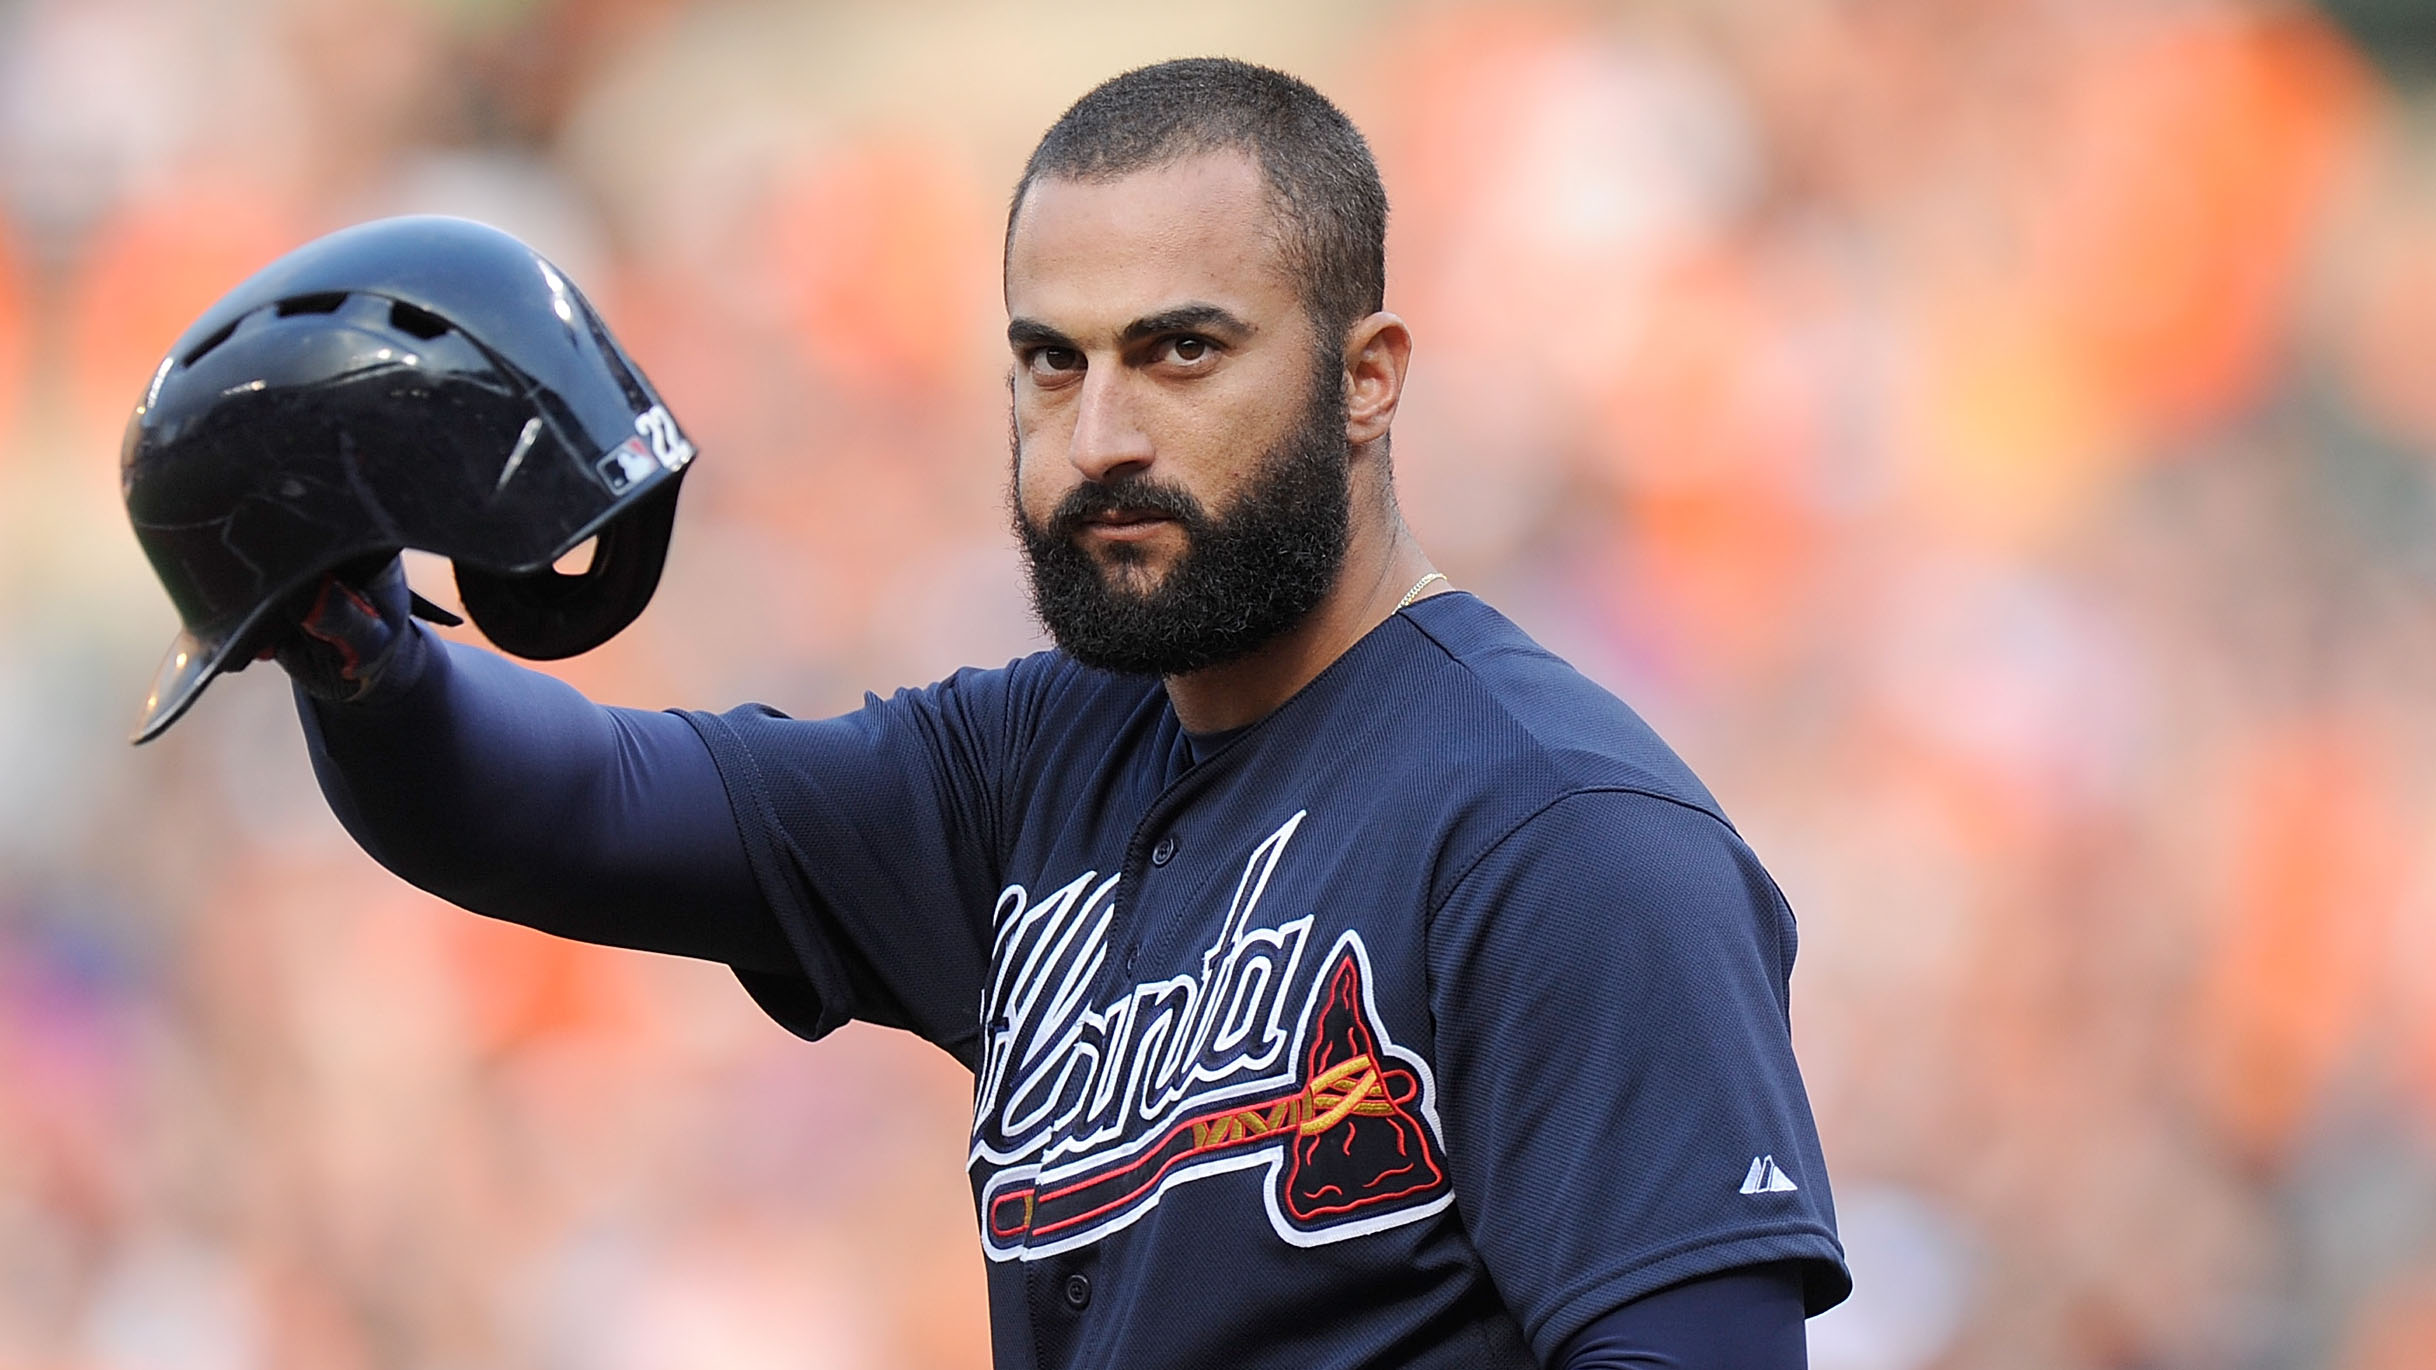 Nick Markakis says every Astro 'needs a beating' for stealing signs -  Sports Illustrated